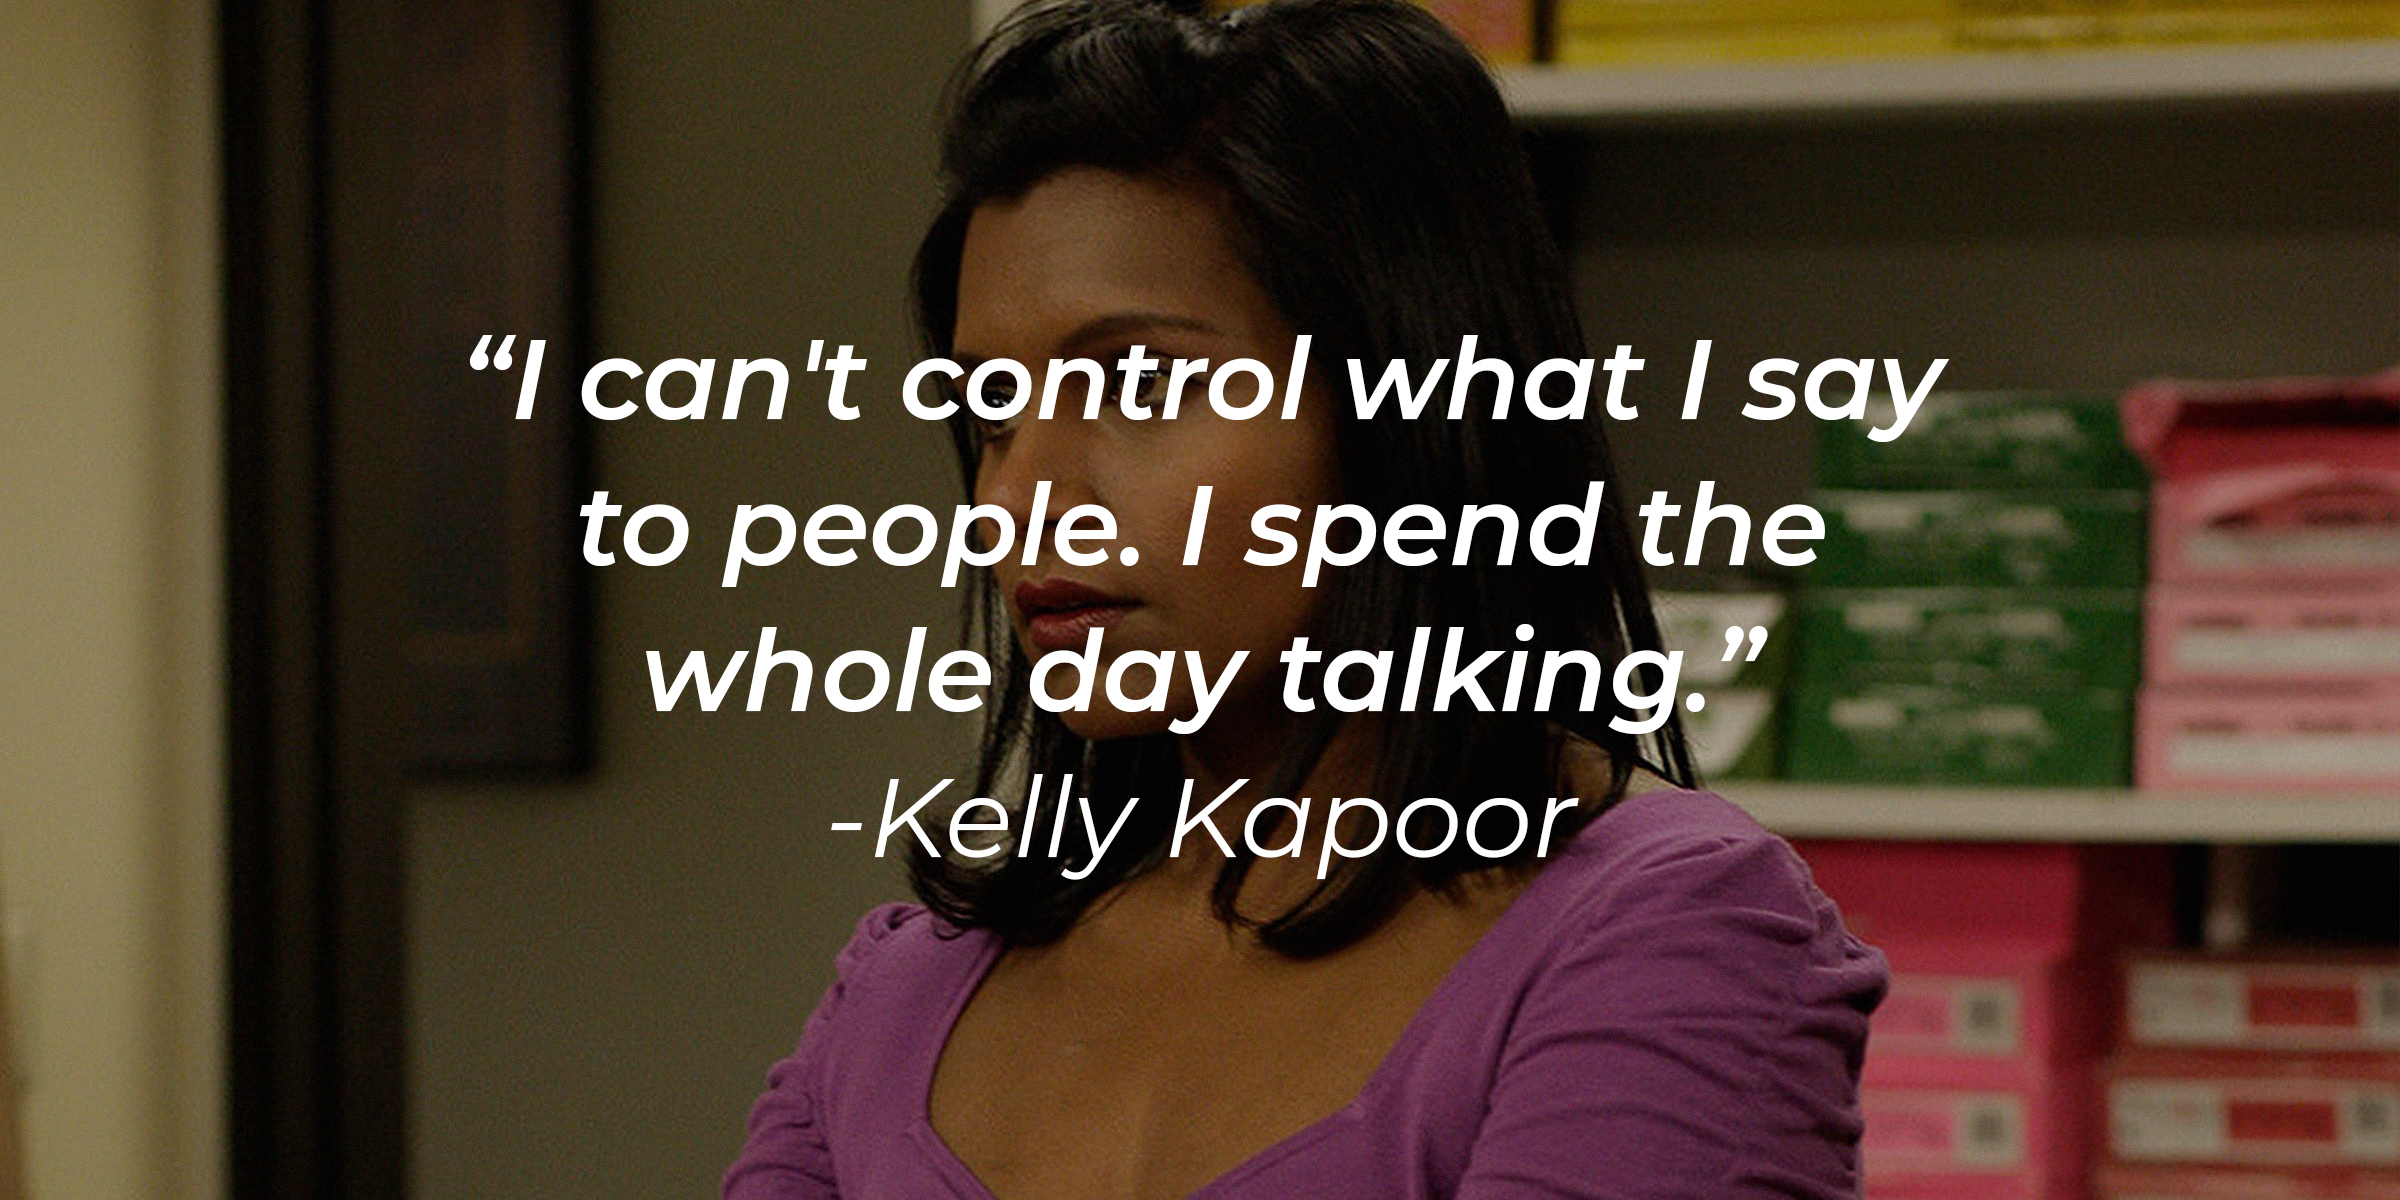 An image of Kelly Kapoor with the quote: "I can't control what I say to people. I spend the whole day talking." | Source: facebook.com/TheOfficeTV